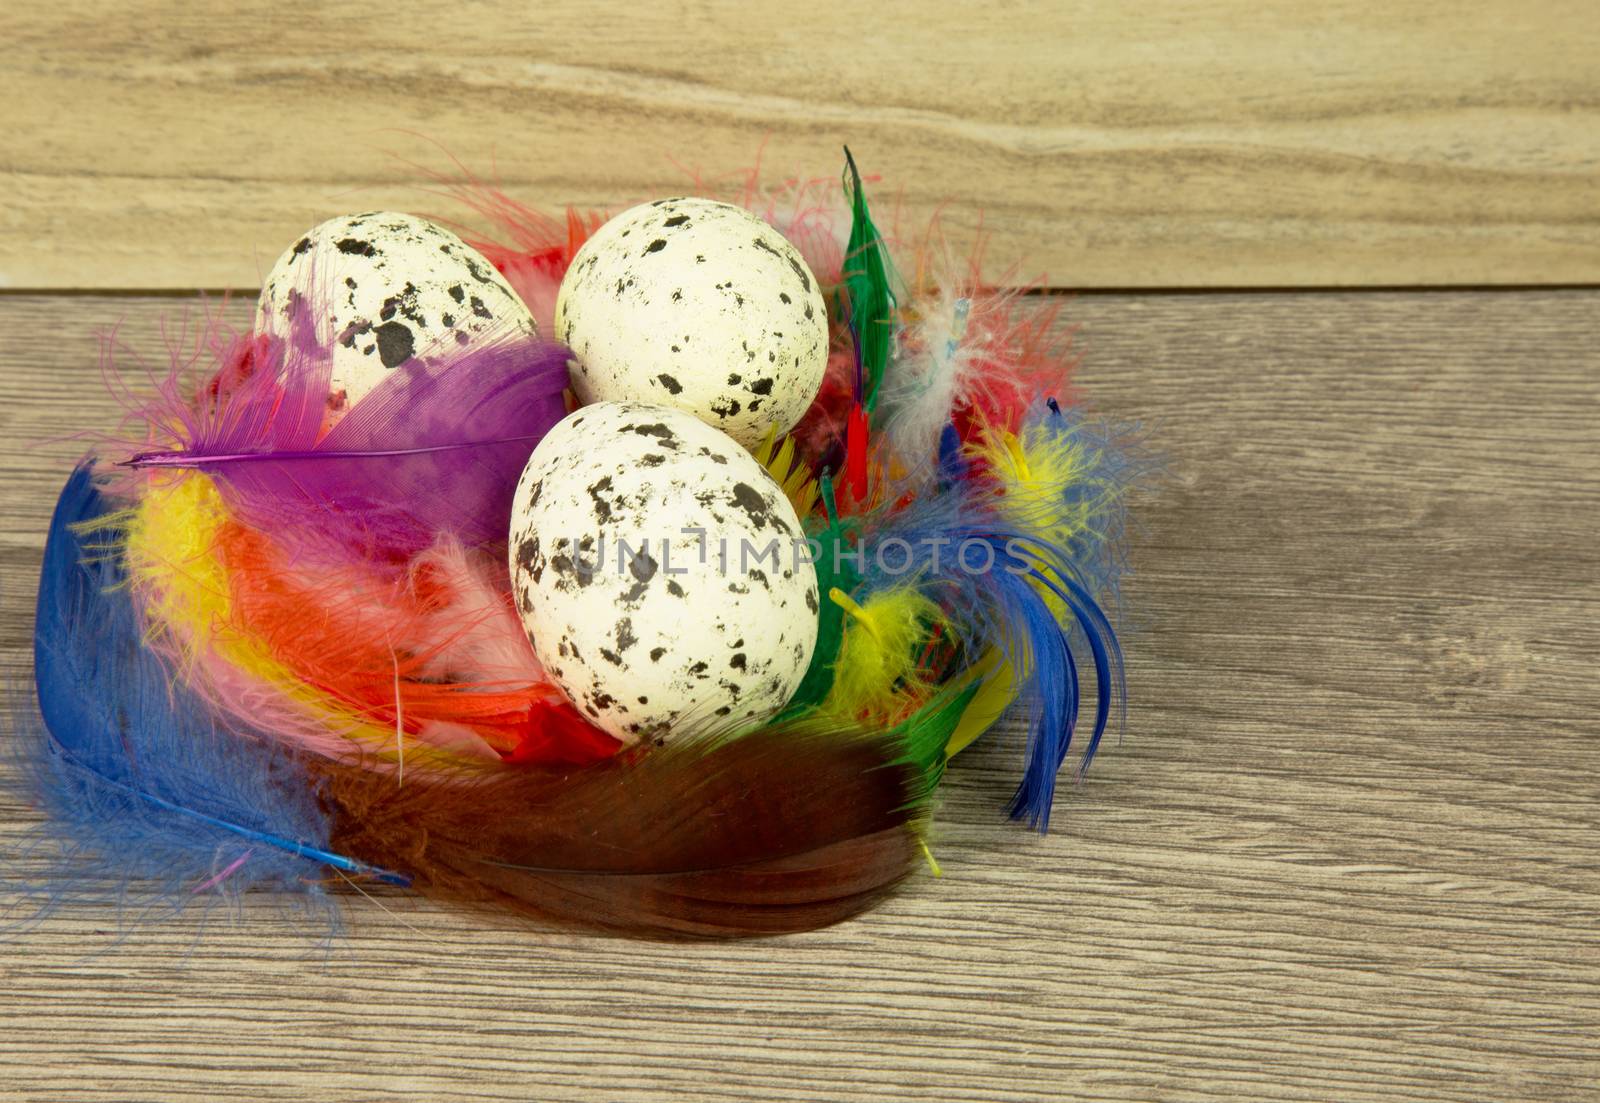 Easter decoration,three big,speckled eggs in a nest with colorful feathers on old wooden countertop.Horizontal view.